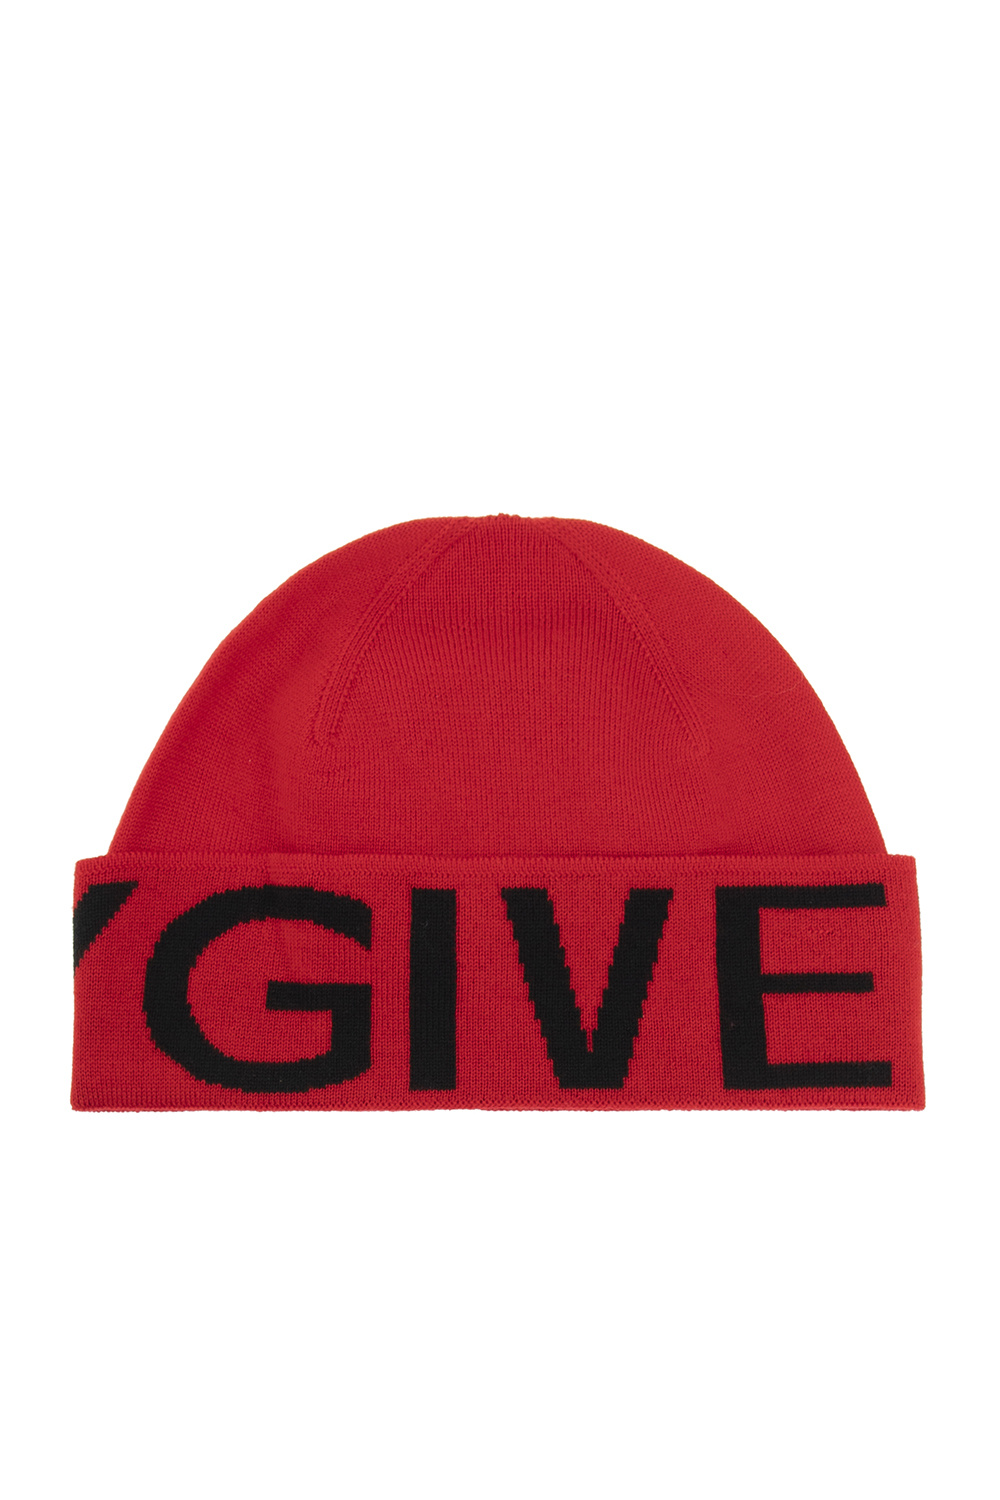 givenchy WOMEN Wool beanie